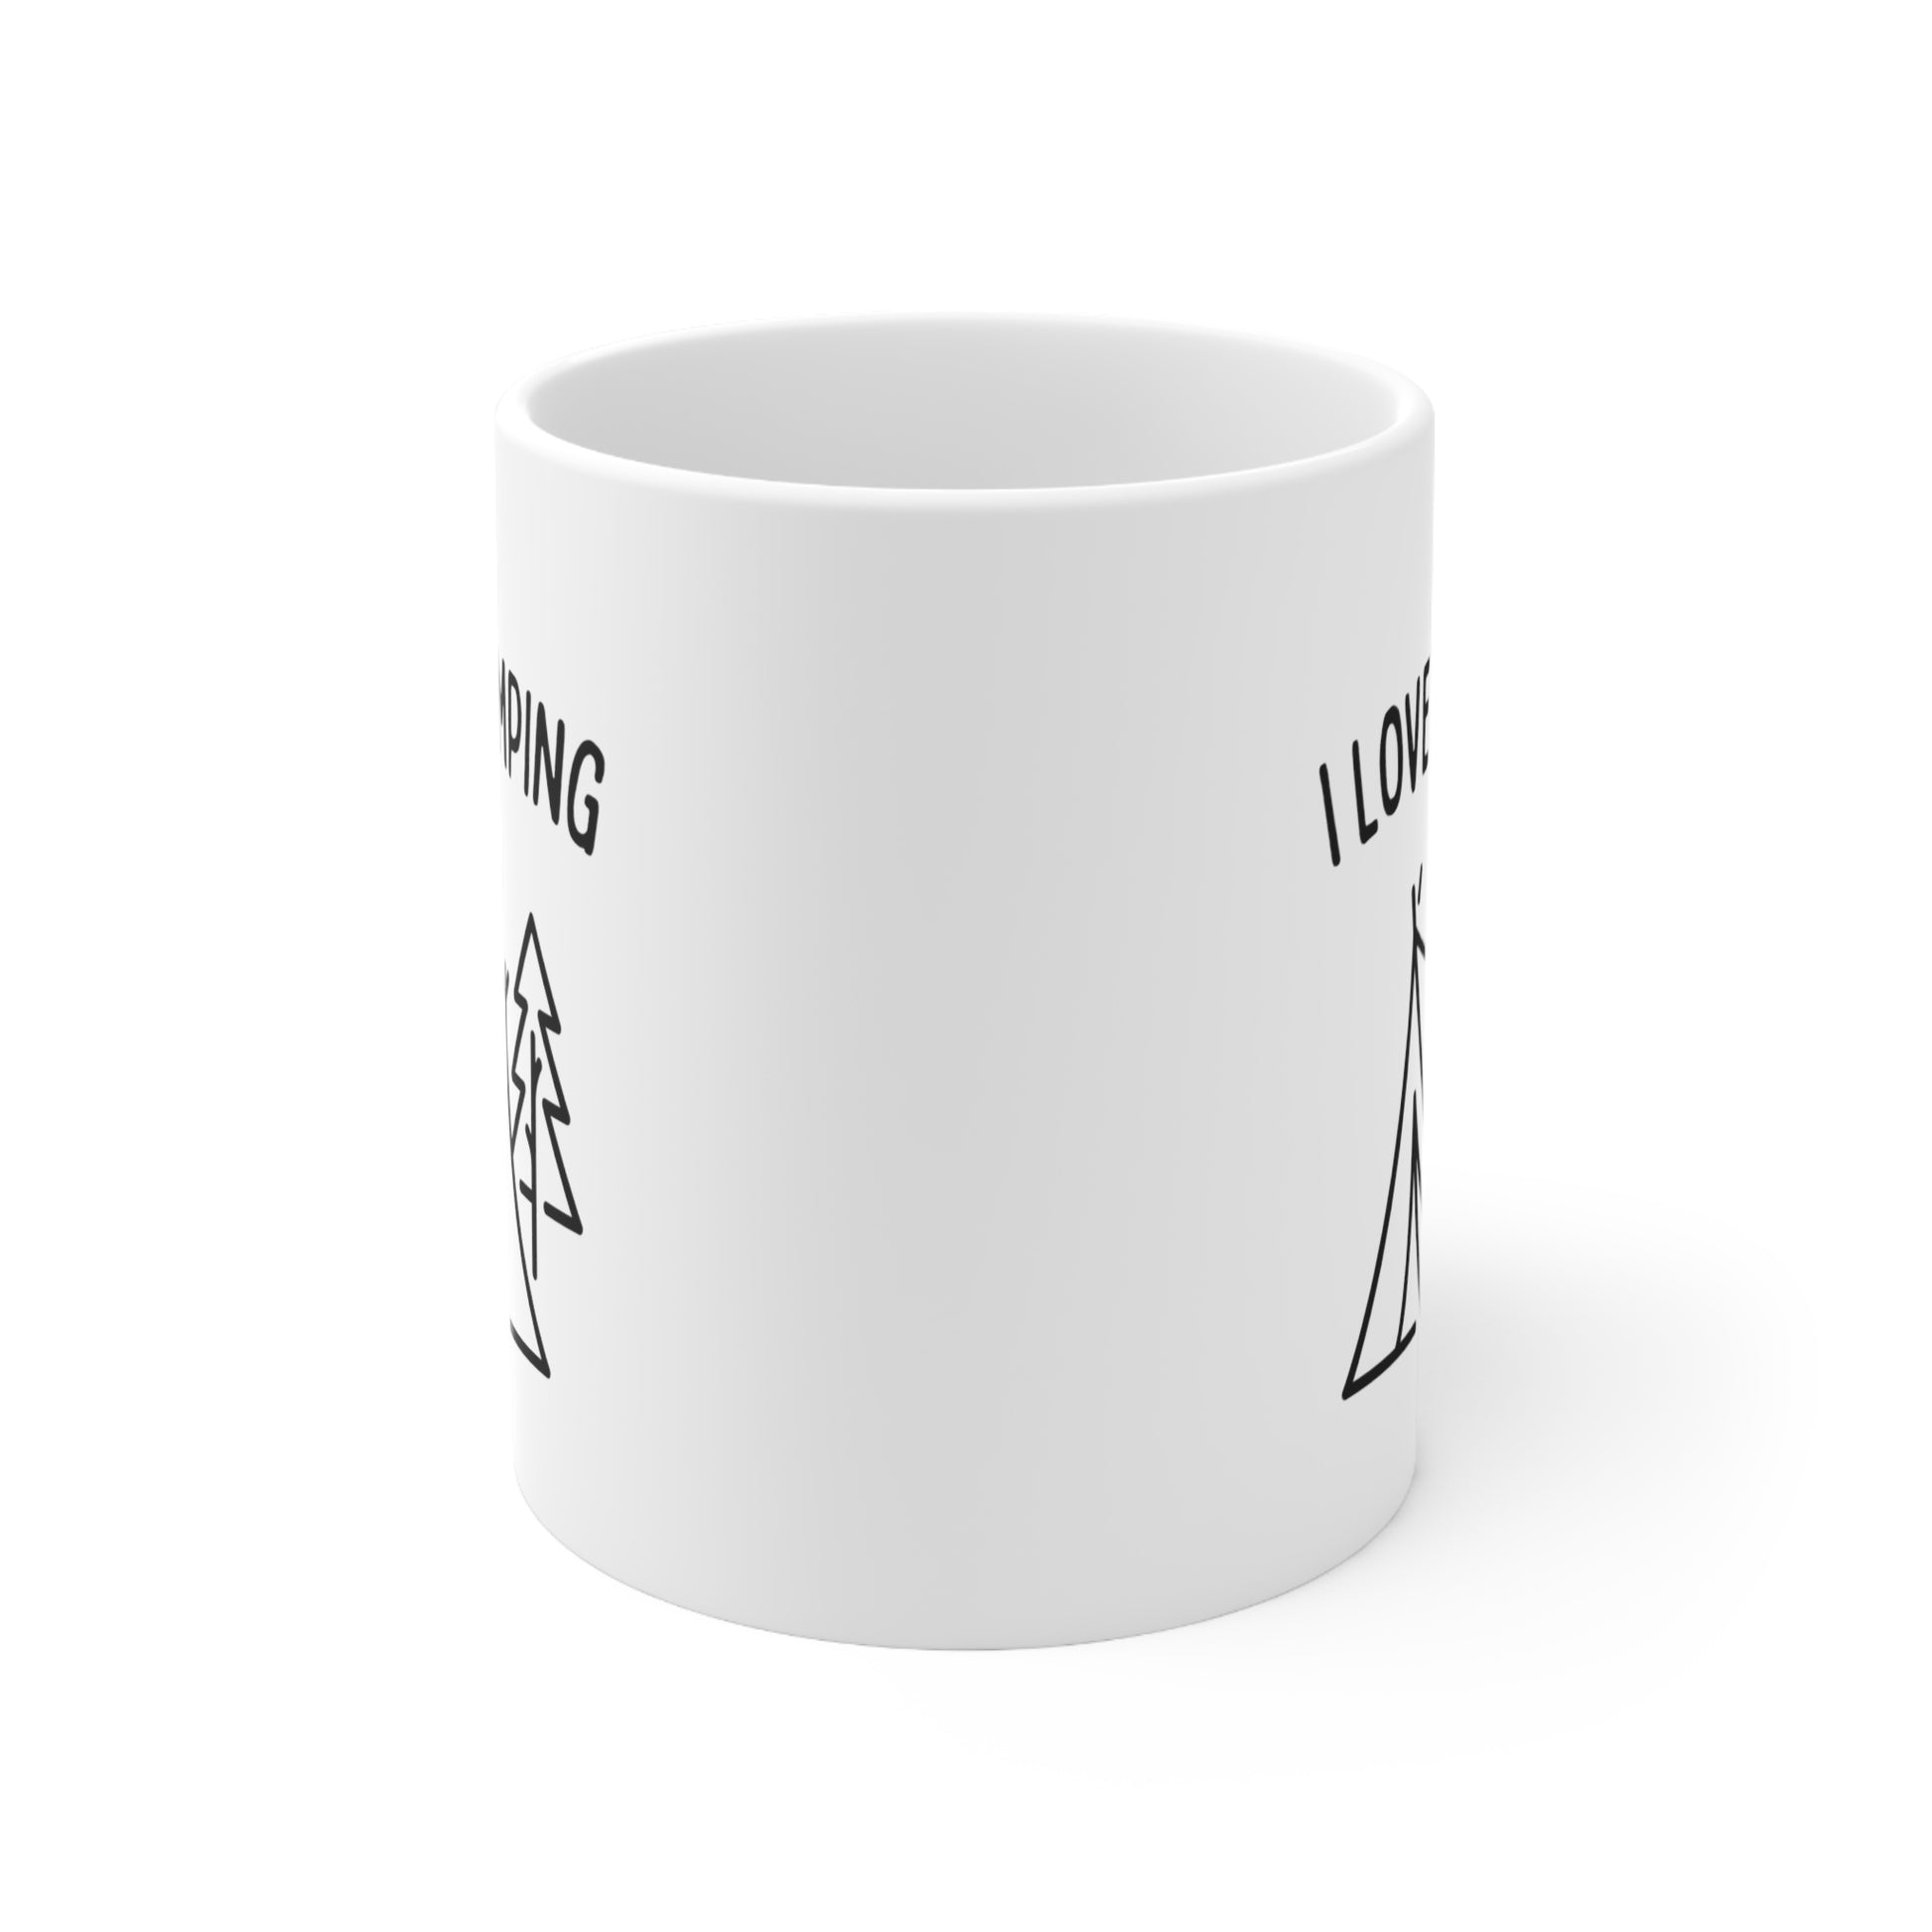 "I Love Camping" Coffee Mug - Weave Got Gifts - Unique Gifts You Won’t Find Anywhere Else!